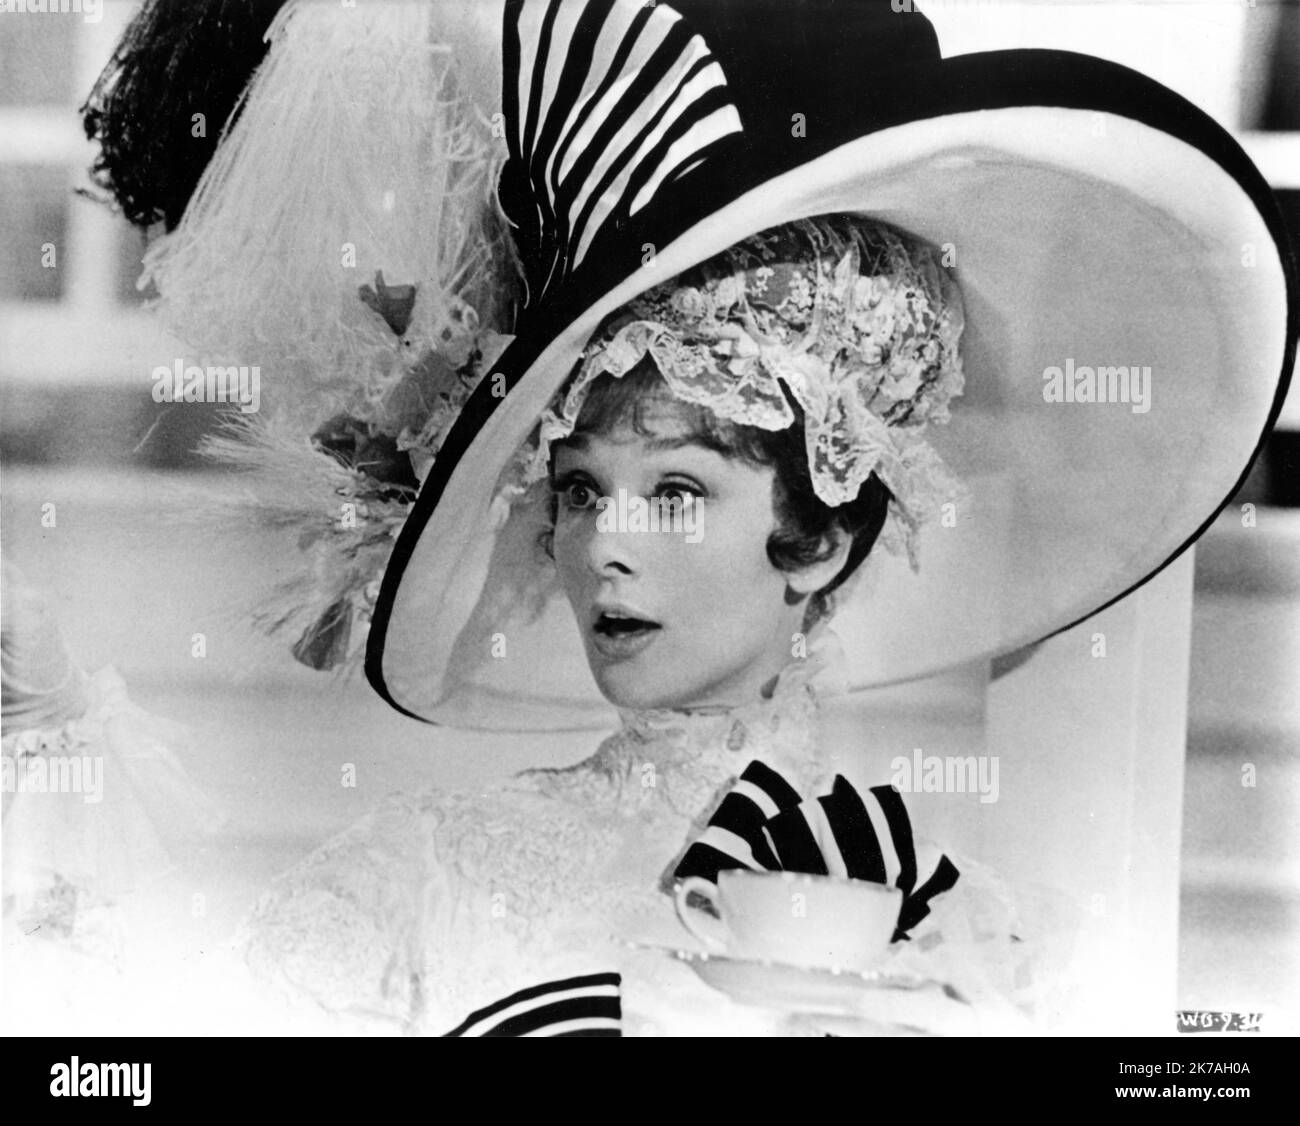 AUDREY HEPBURN as Eliza Doolittle in MY FAIR LADY 1964 director GEORGE CUKOR from the Broadway musical adapted from the play Pygmalion by George Bernard Shaw screenplay book and lyrics Alan Jay Lerner music Frederick Loewe production design and costumes Cecil Beaton producer Jack L. Warner Warner Bros. Stock Photo